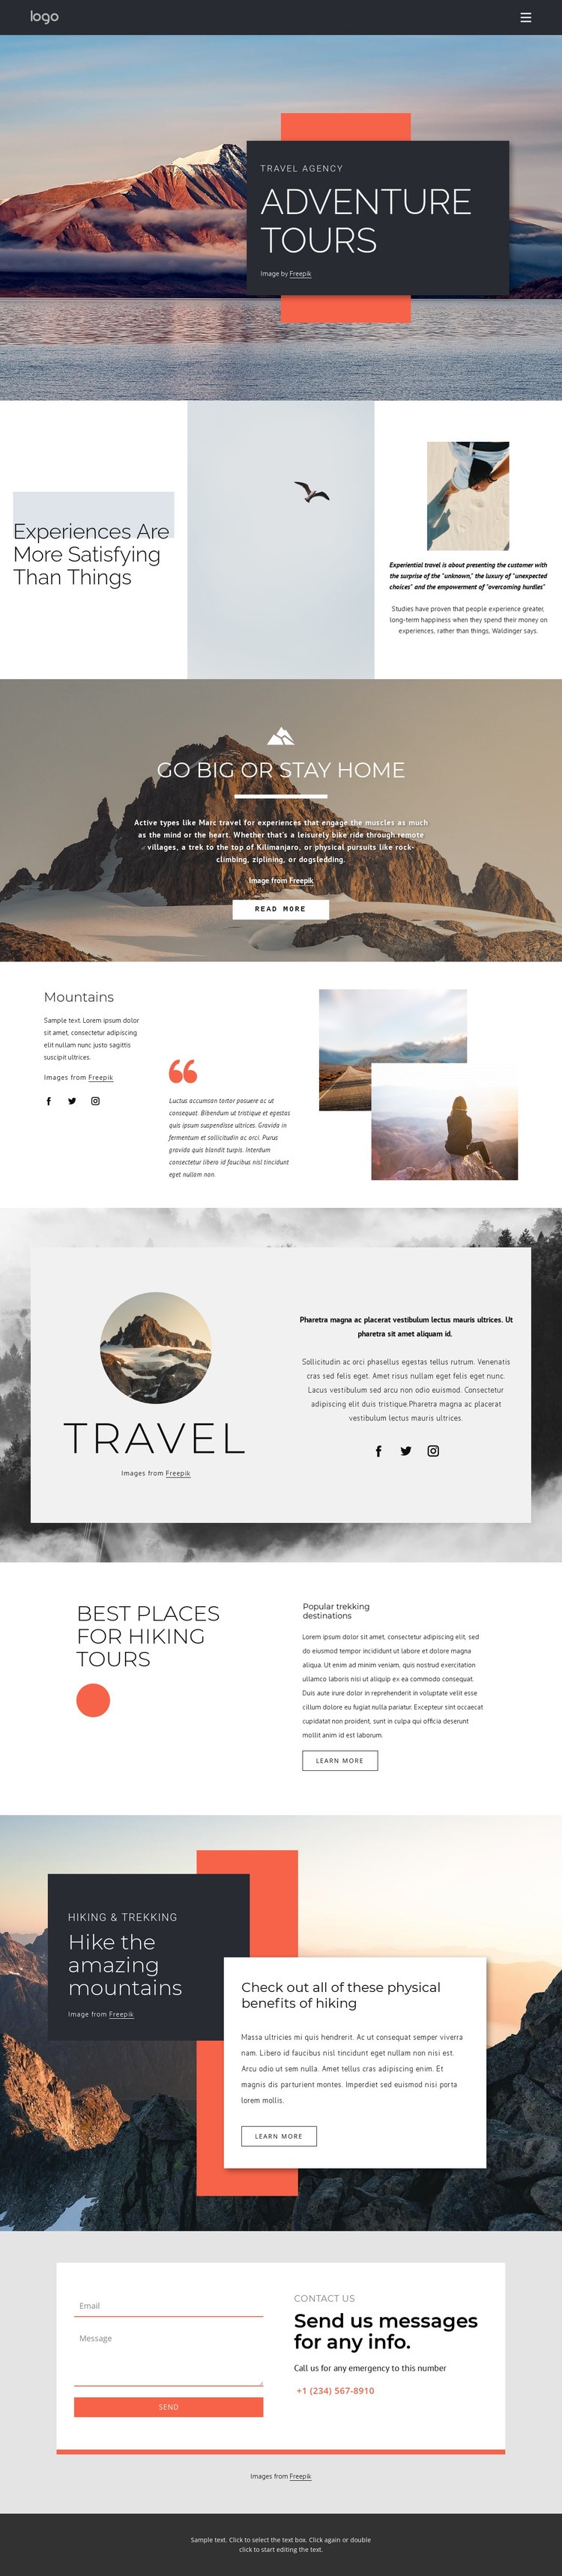 We provide hiking tours Homepage Design